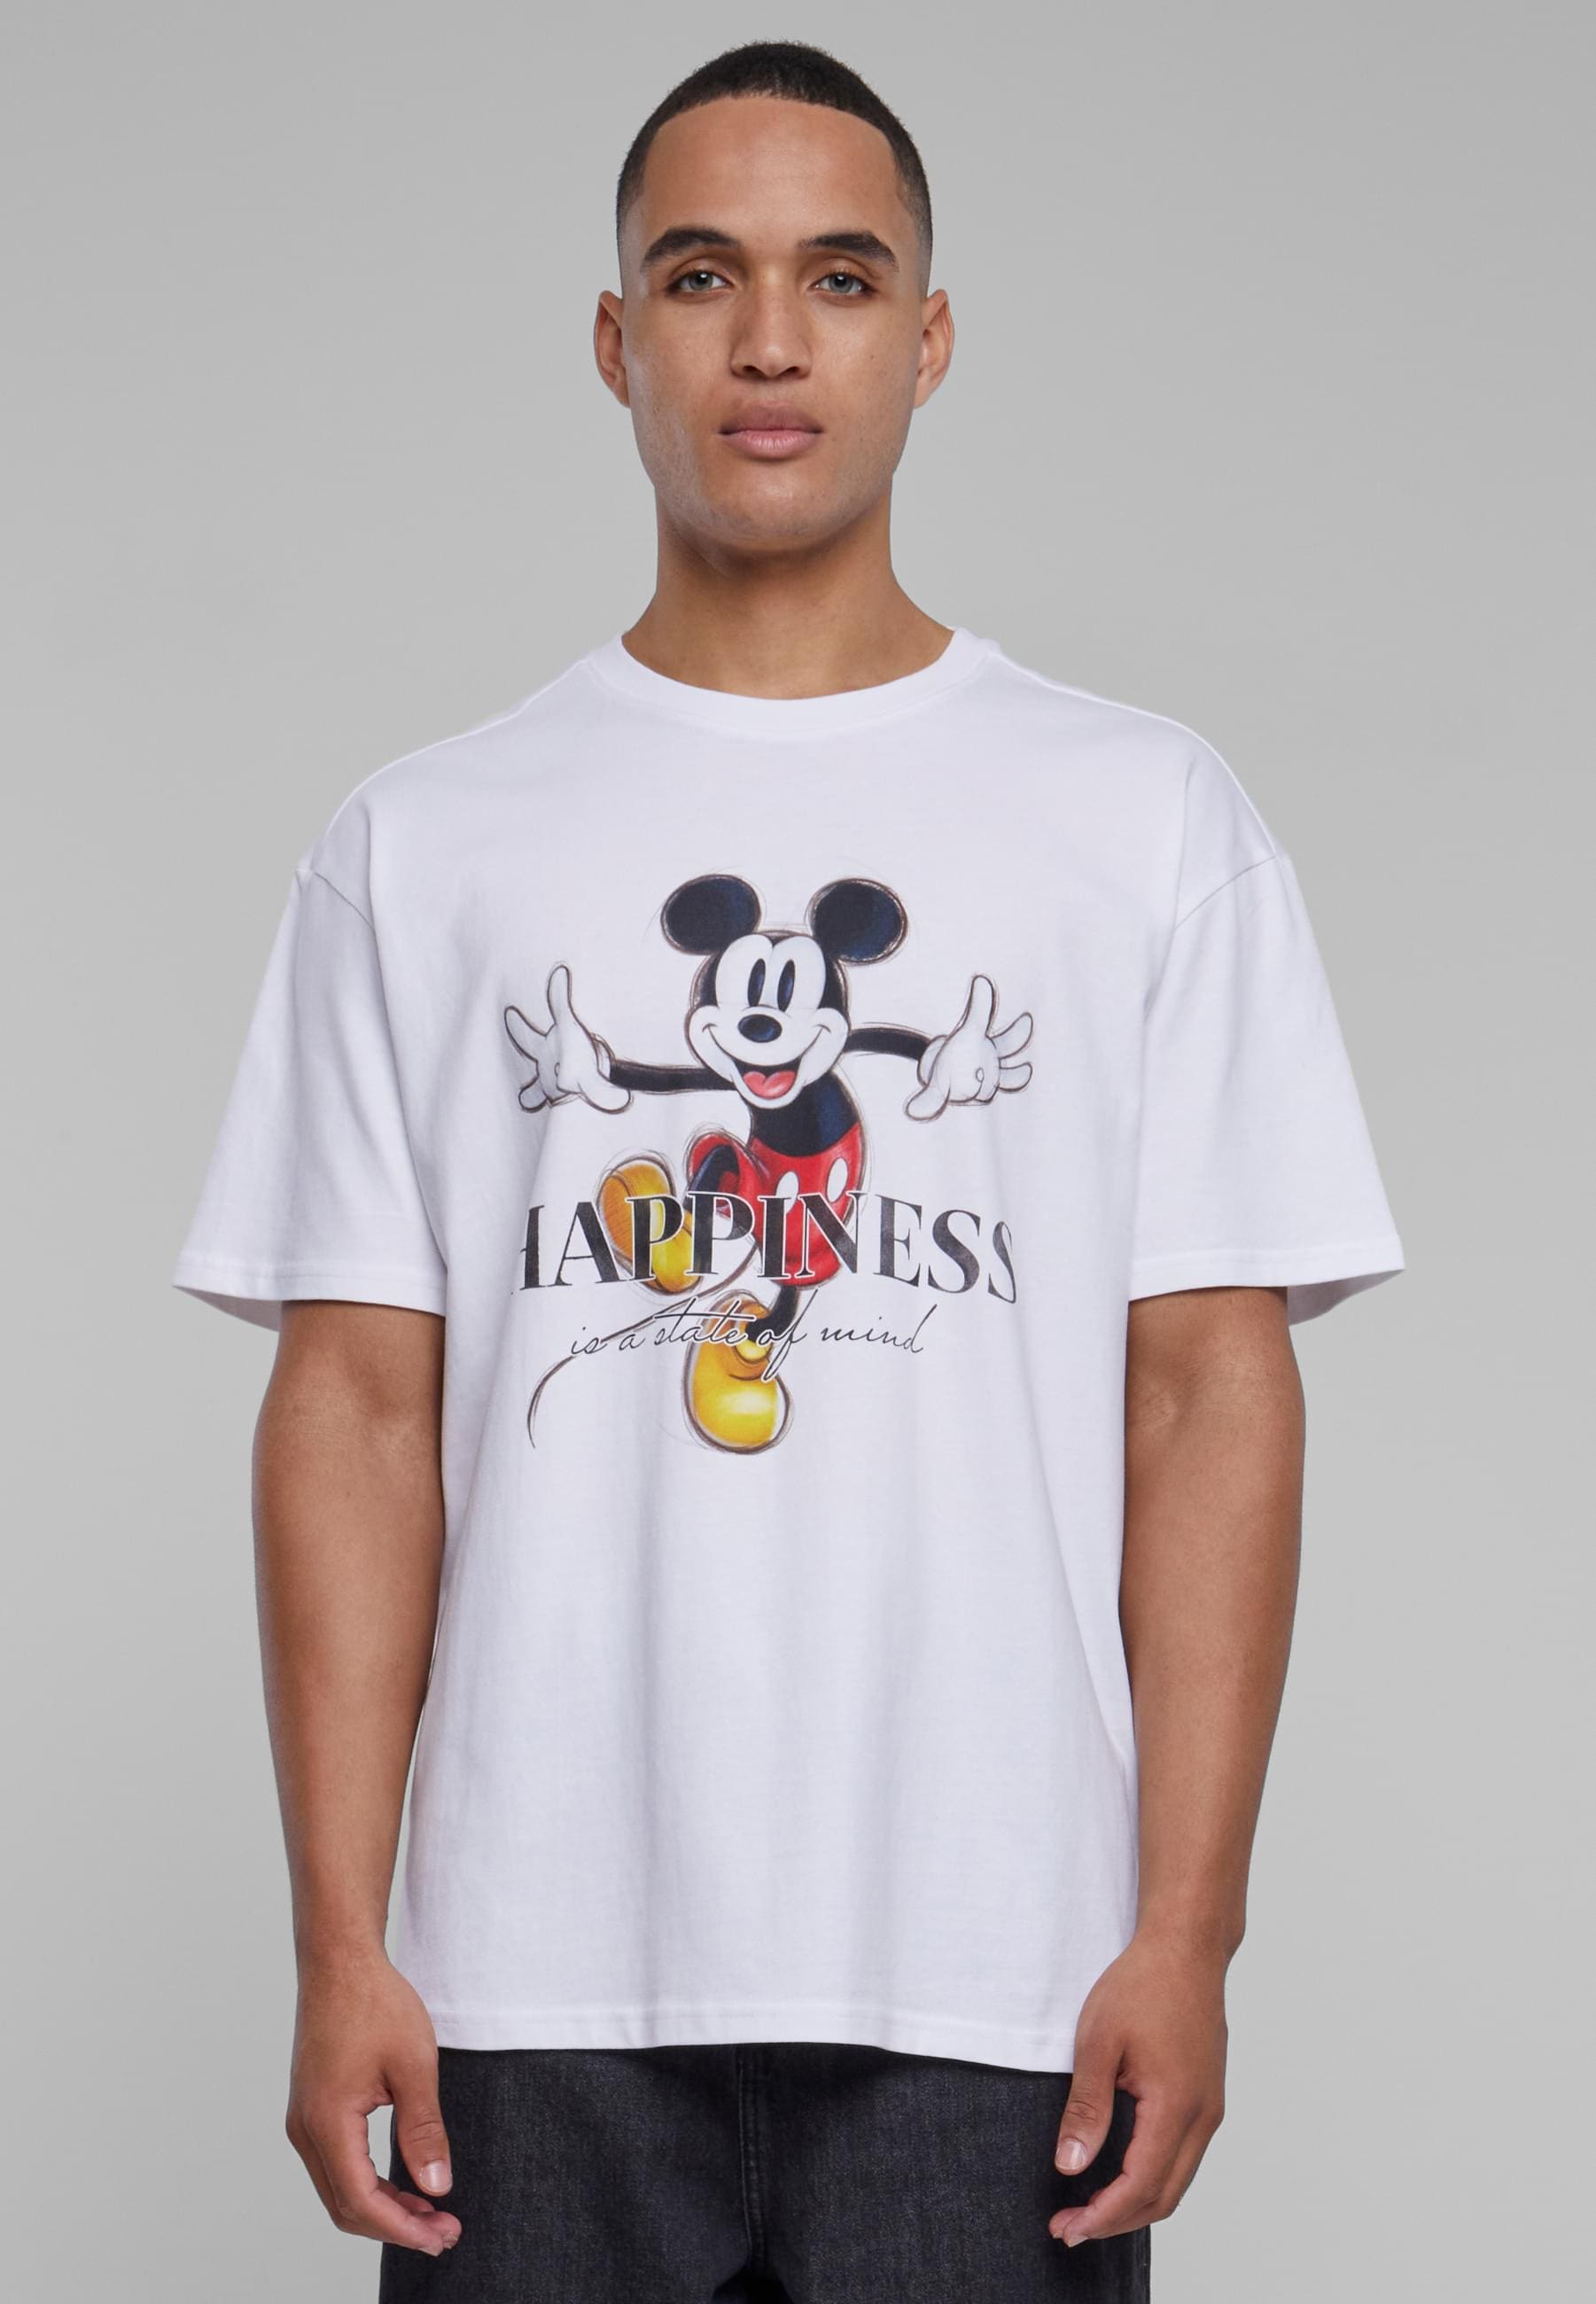 online Oversize BAUR tlg.) Mister Mickey Tee«, Disney T-Shirt by | 100 »Unisex (1 Upscale Tee Happiness kaufen